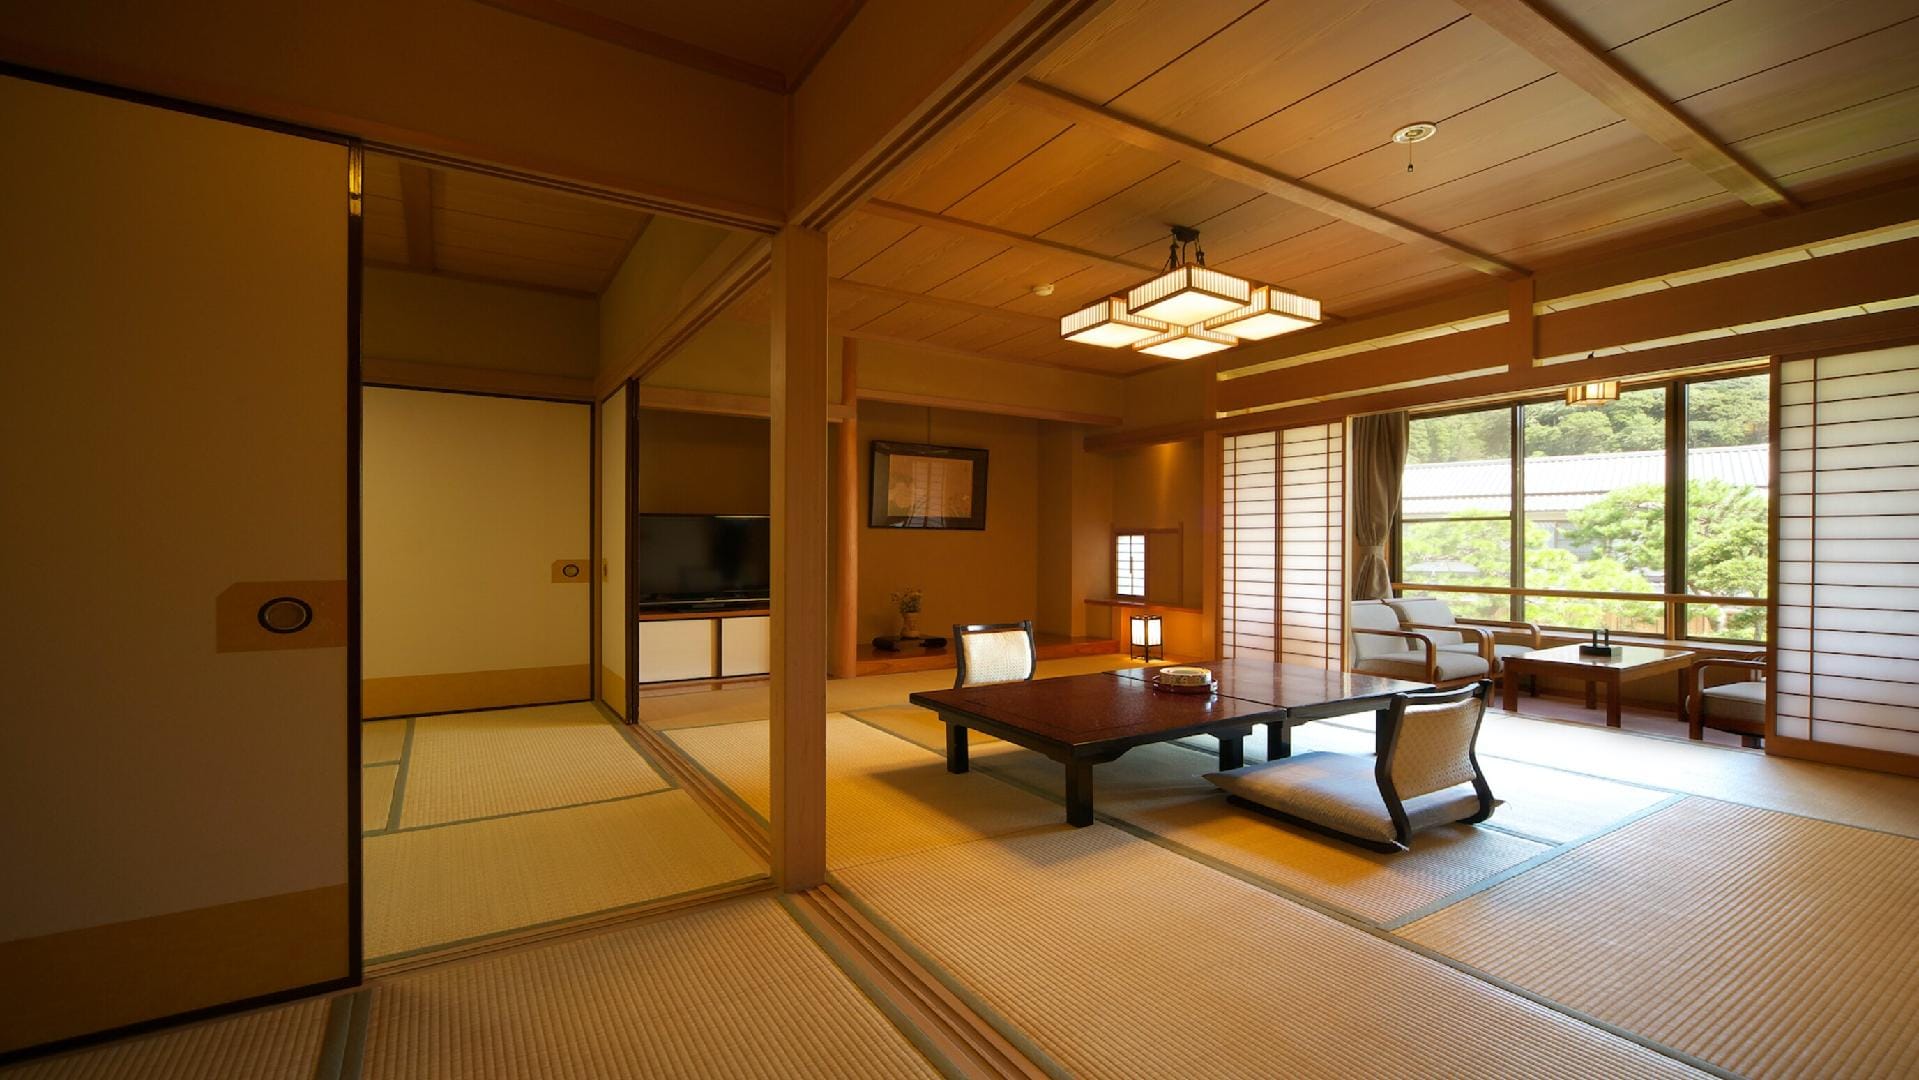 B type garden view Japanese-style room 10 tatami mats + next room with 6 tatami mats